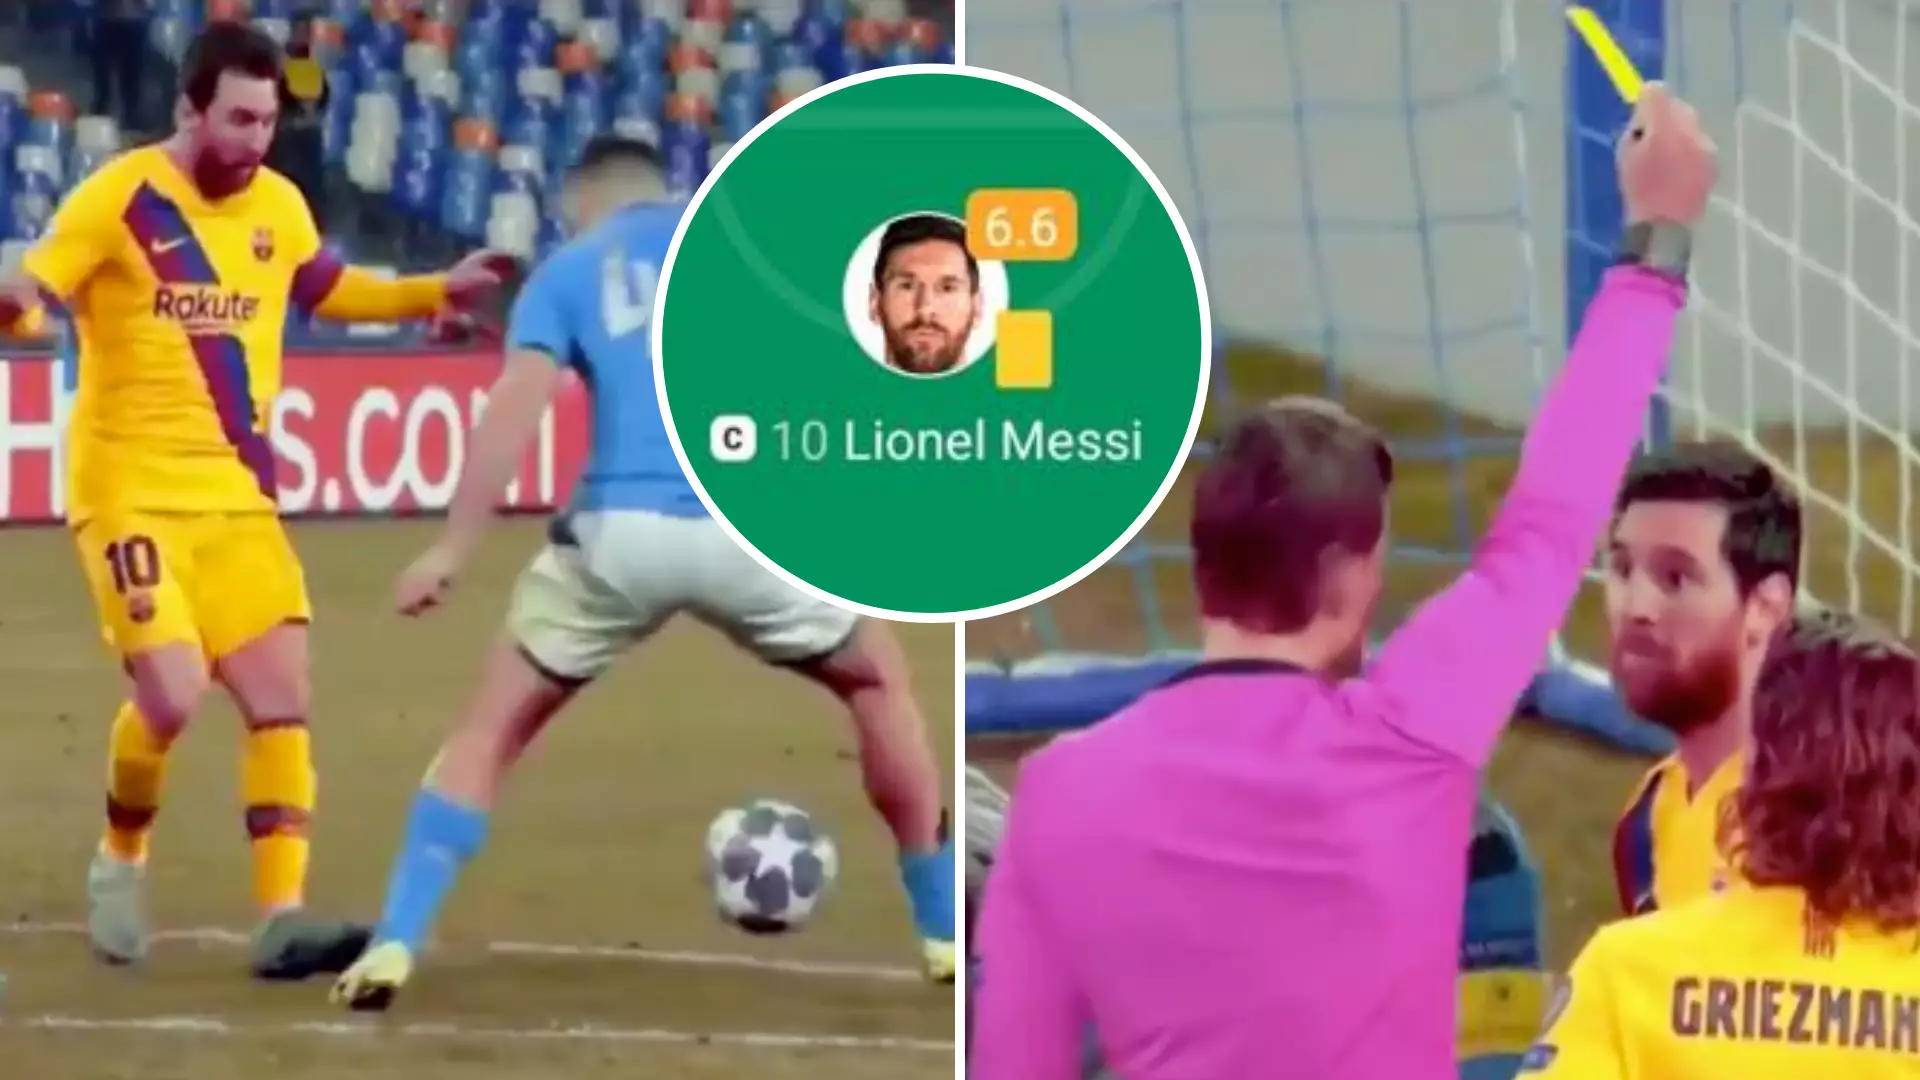 Fan’s Lionel Messi Compilation Vs Napoli Shows His Complete 'Disasterclass Performance'